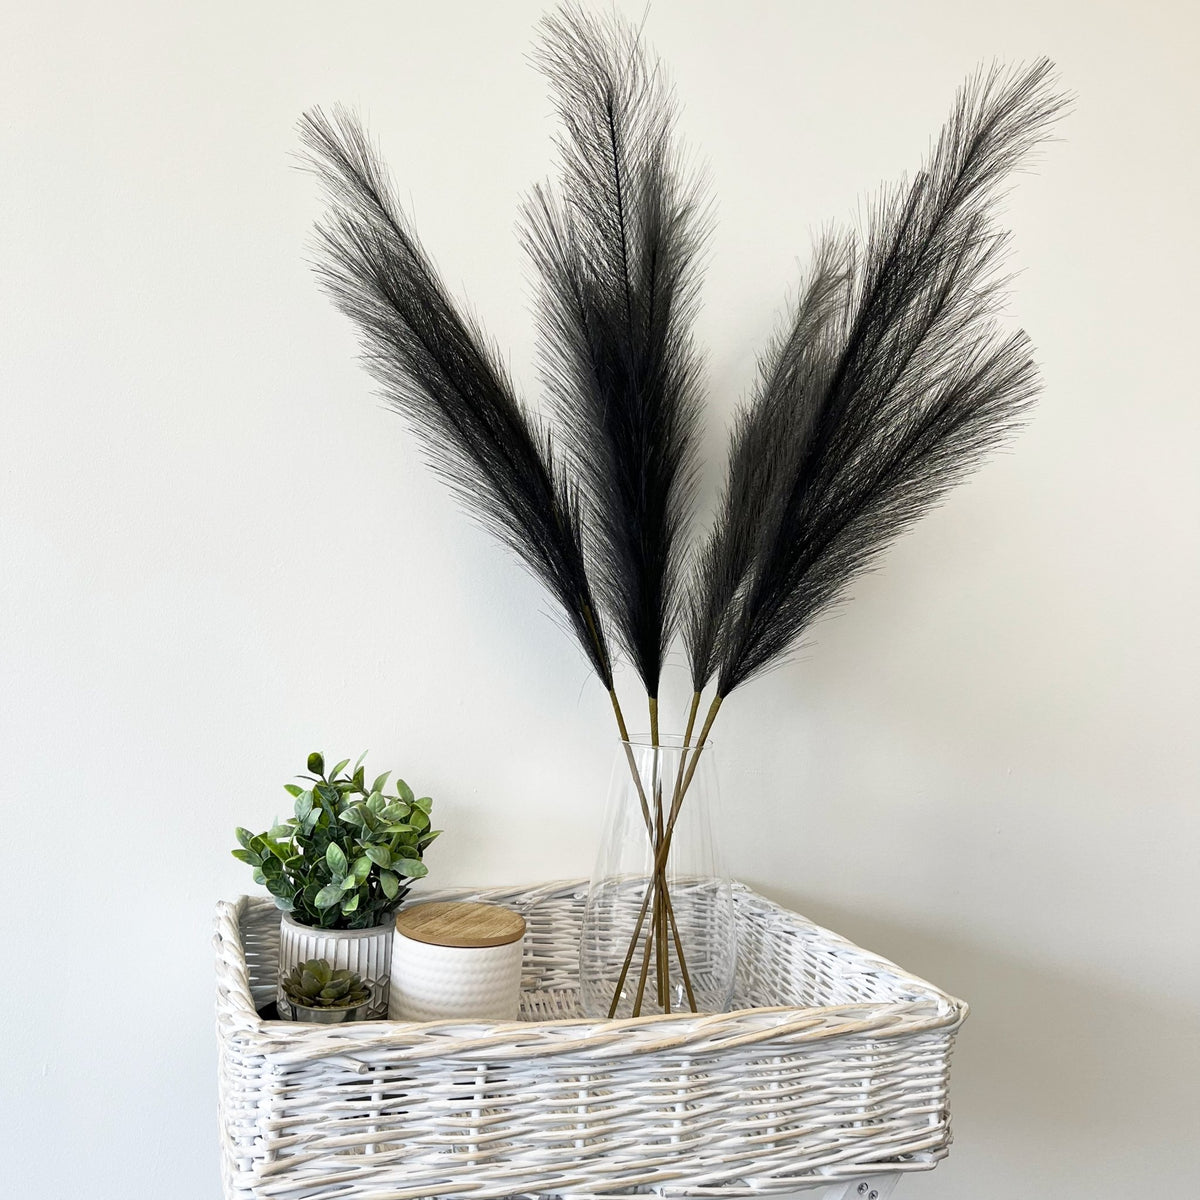 Grey Faux Pampas Grass Stems in glass vase on wicker table with plant and candle.